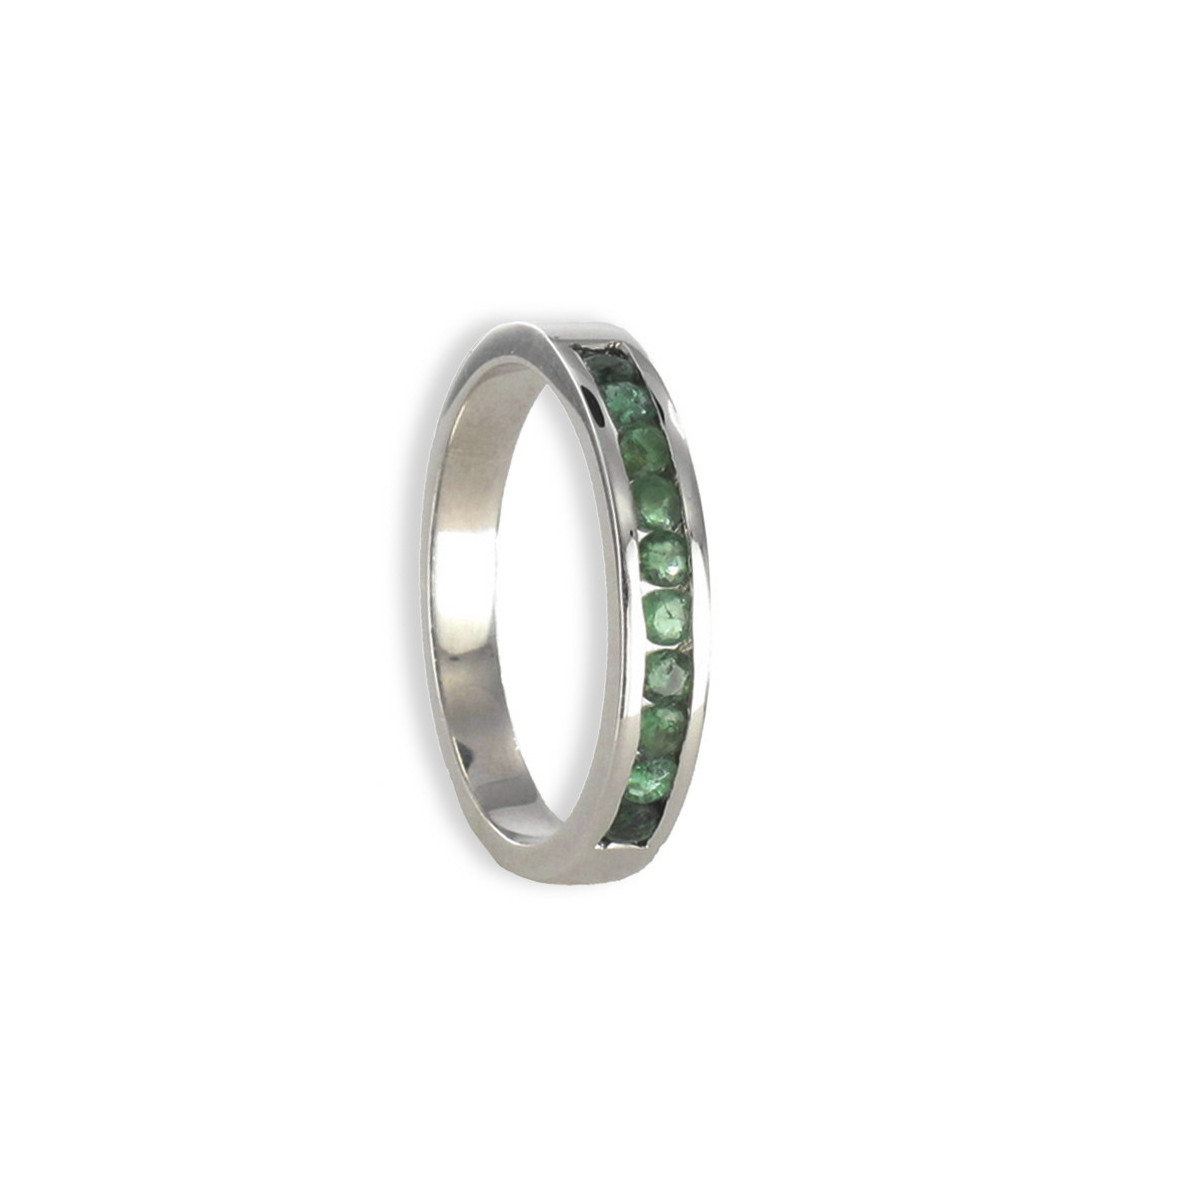 HALF RING 18 KT GOLD WITH EMERALDS